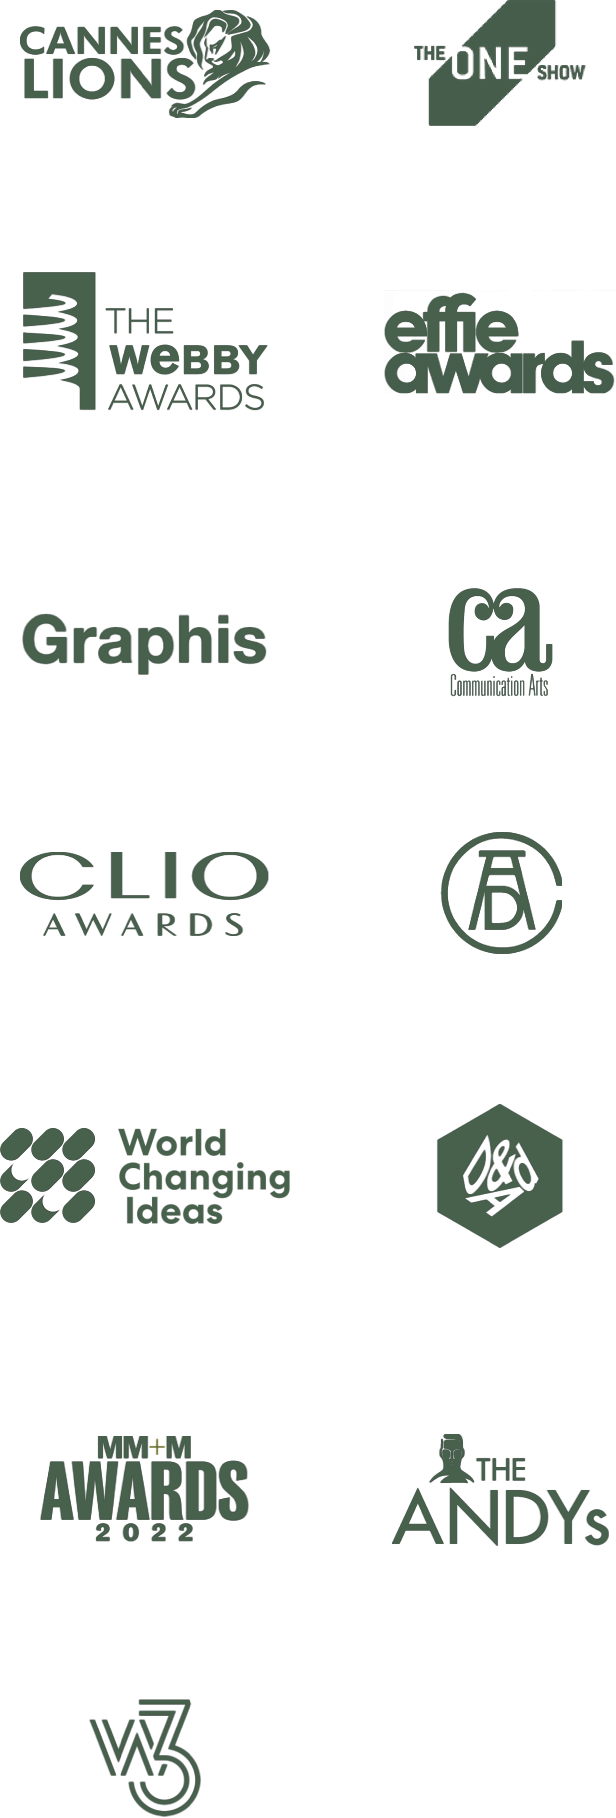 Award logos including Cannes Lions, CLIO Awards, The Webby Awards, MM+M Awards and others.